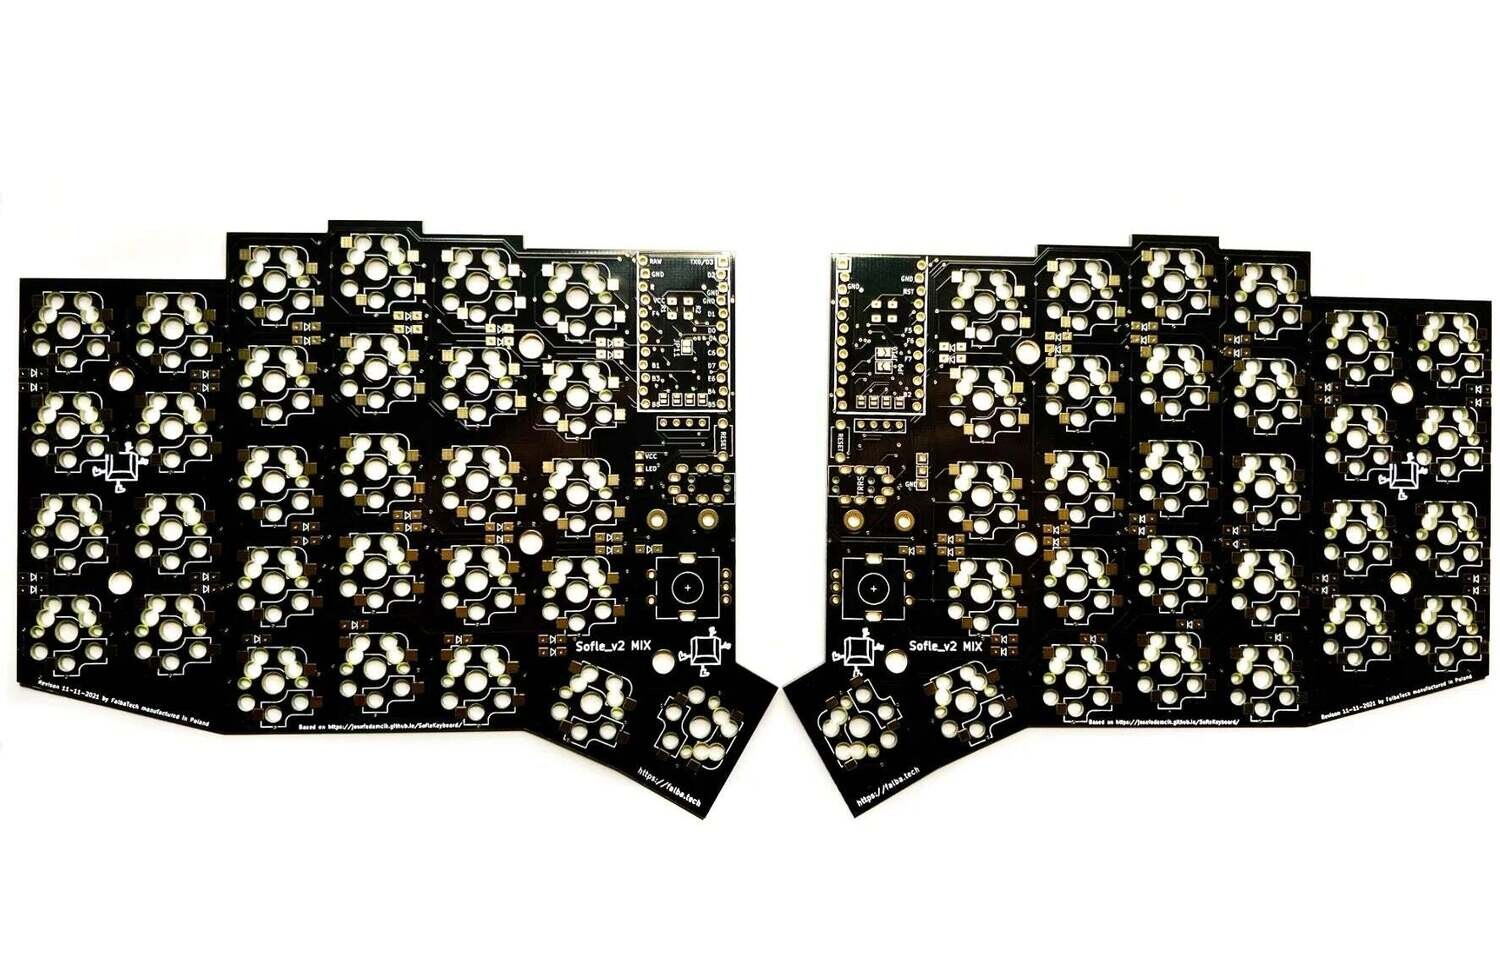 Sofle PCB Electrical Boards (Set of 2)